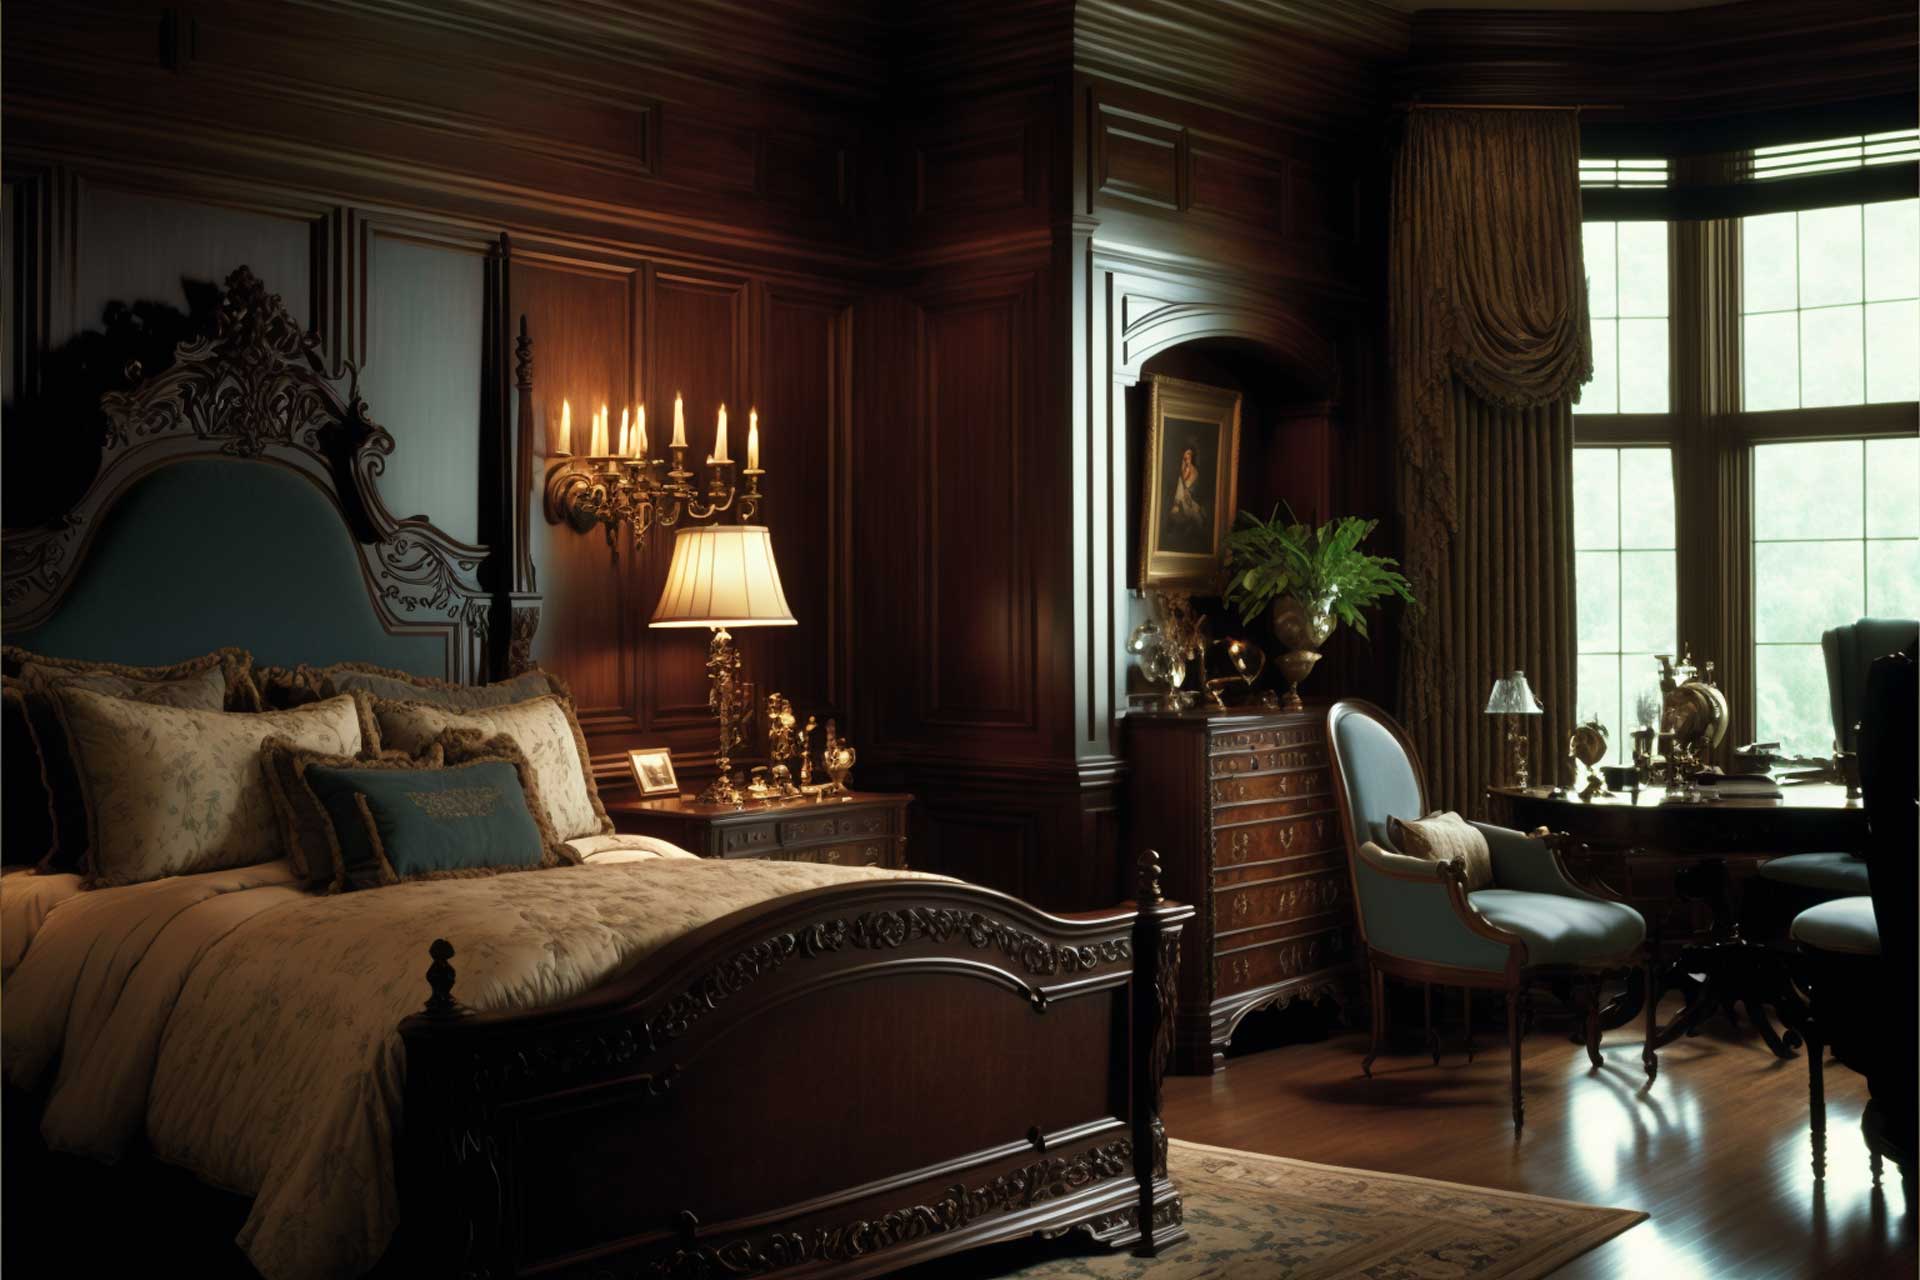 Stately Bedroom With Dark Wood Paneling And Classic Sleigh Bed